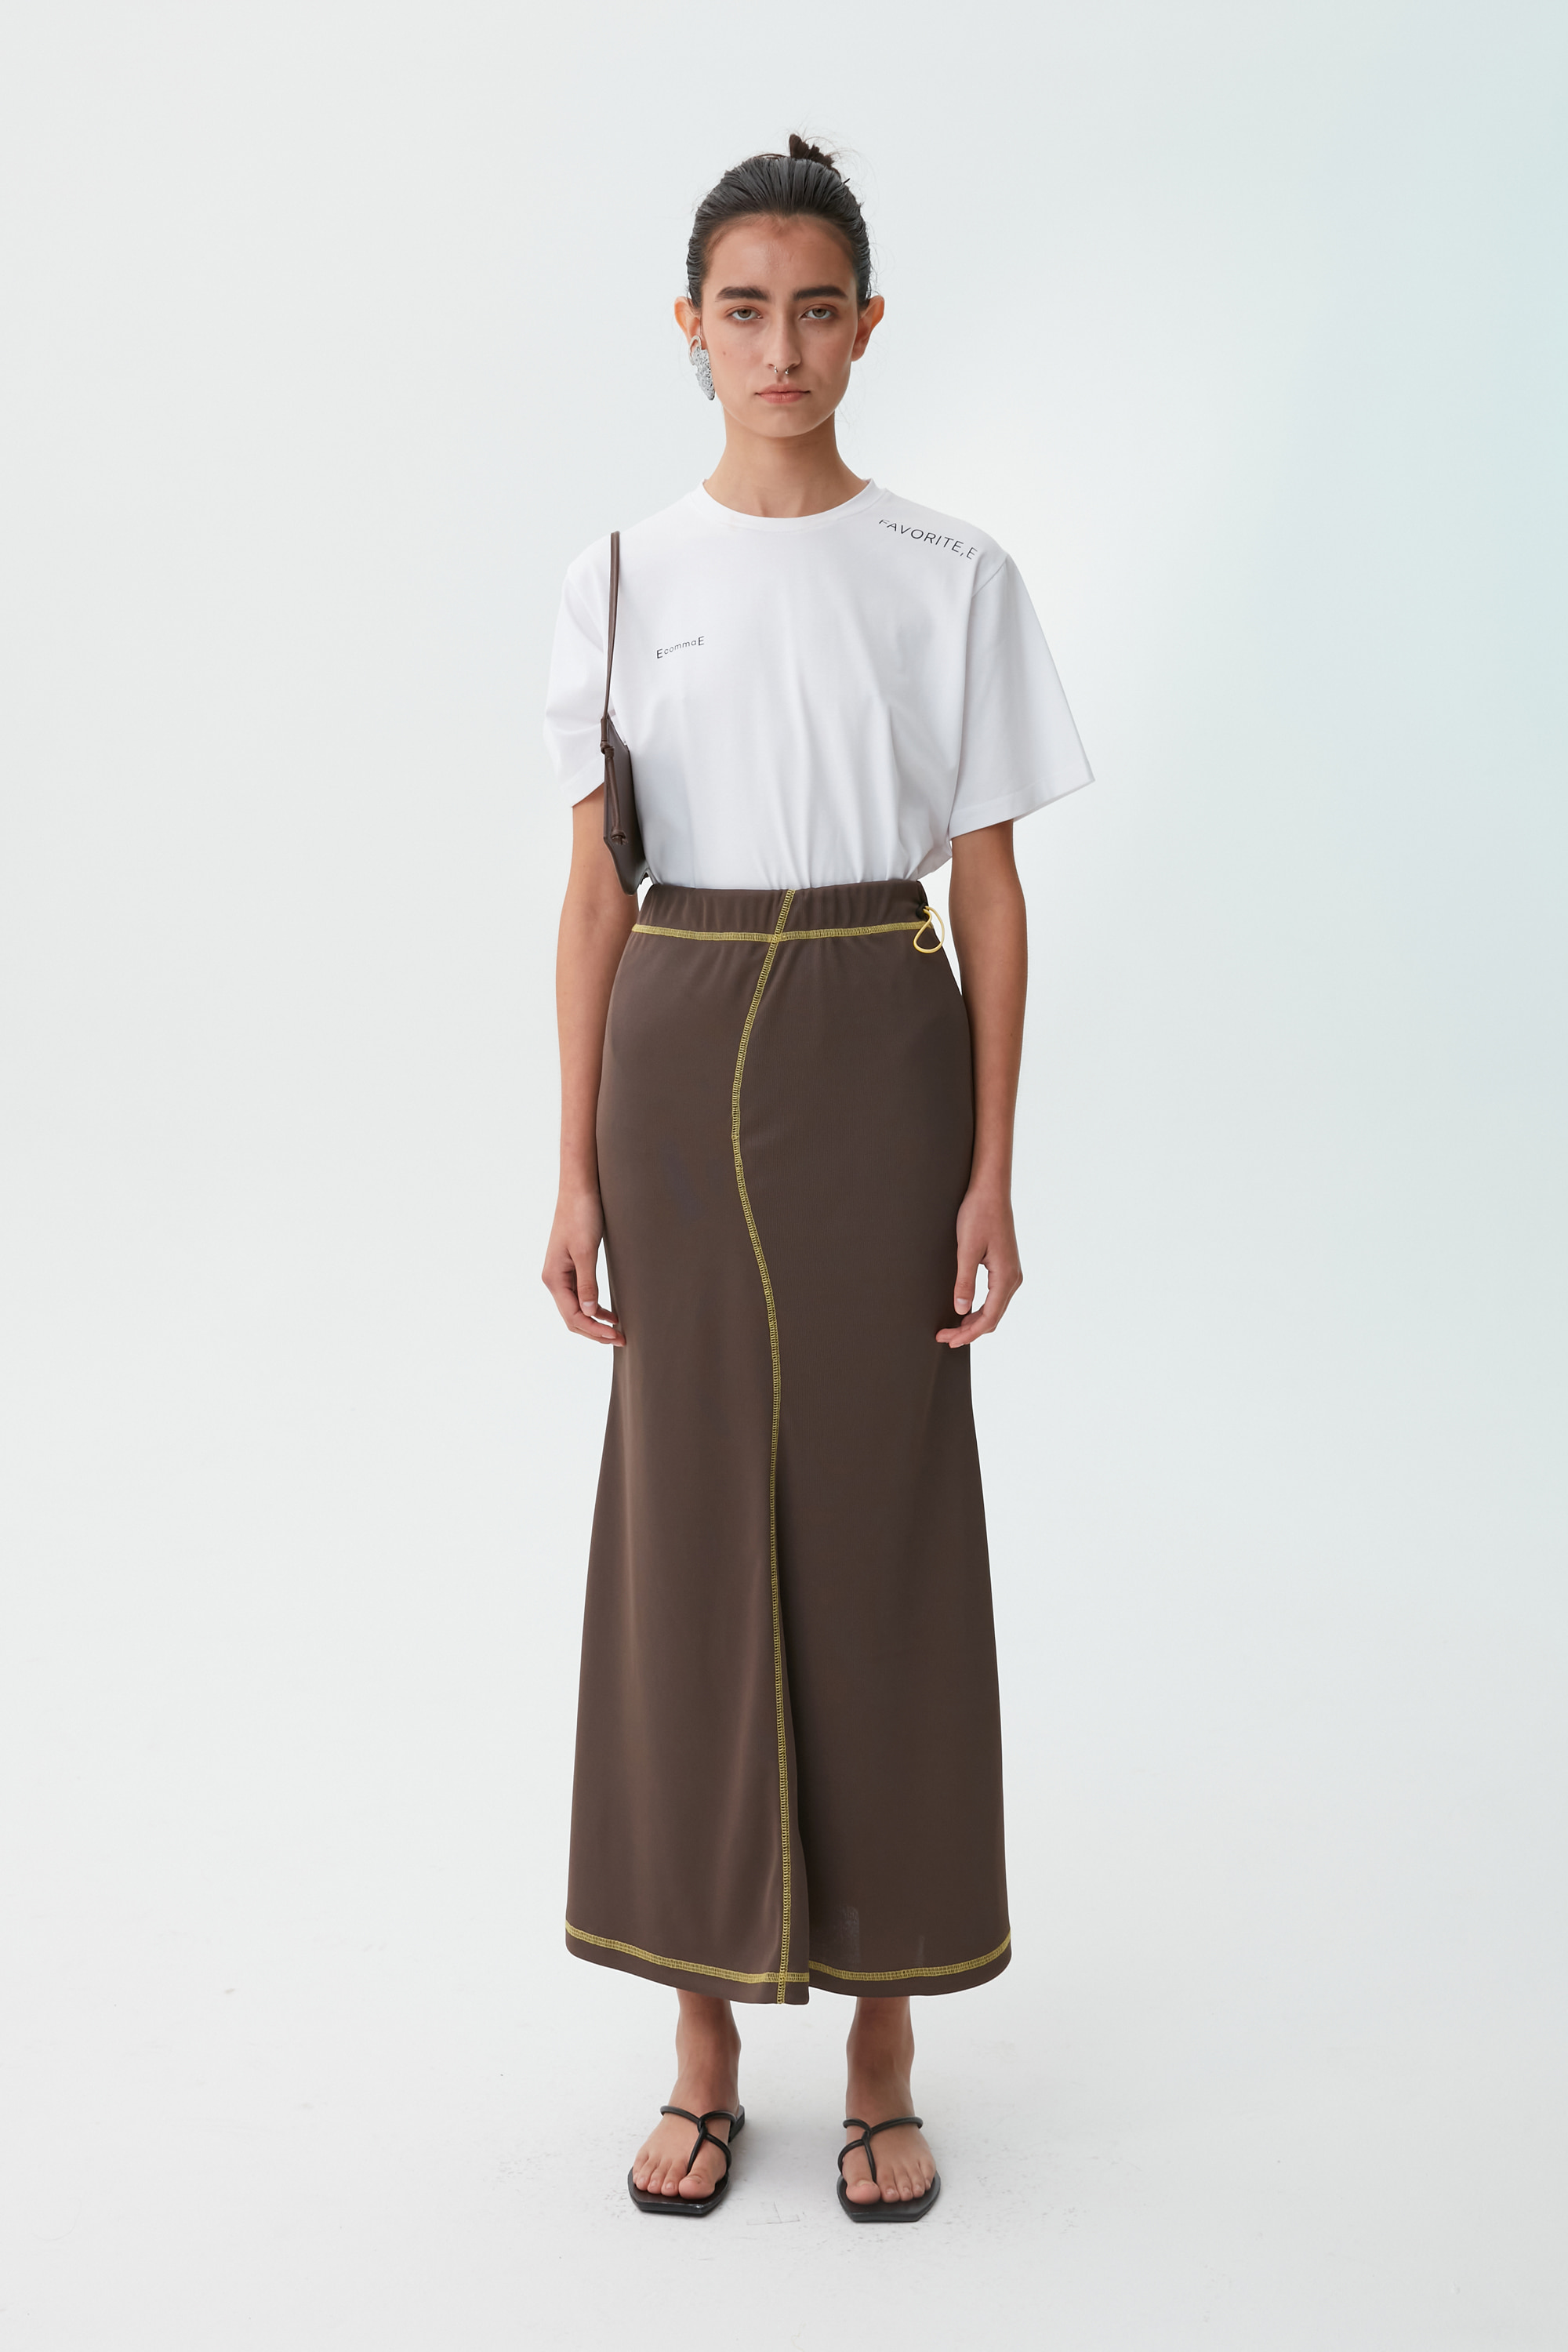 WAVE FLARE SKIRT (BROWN)